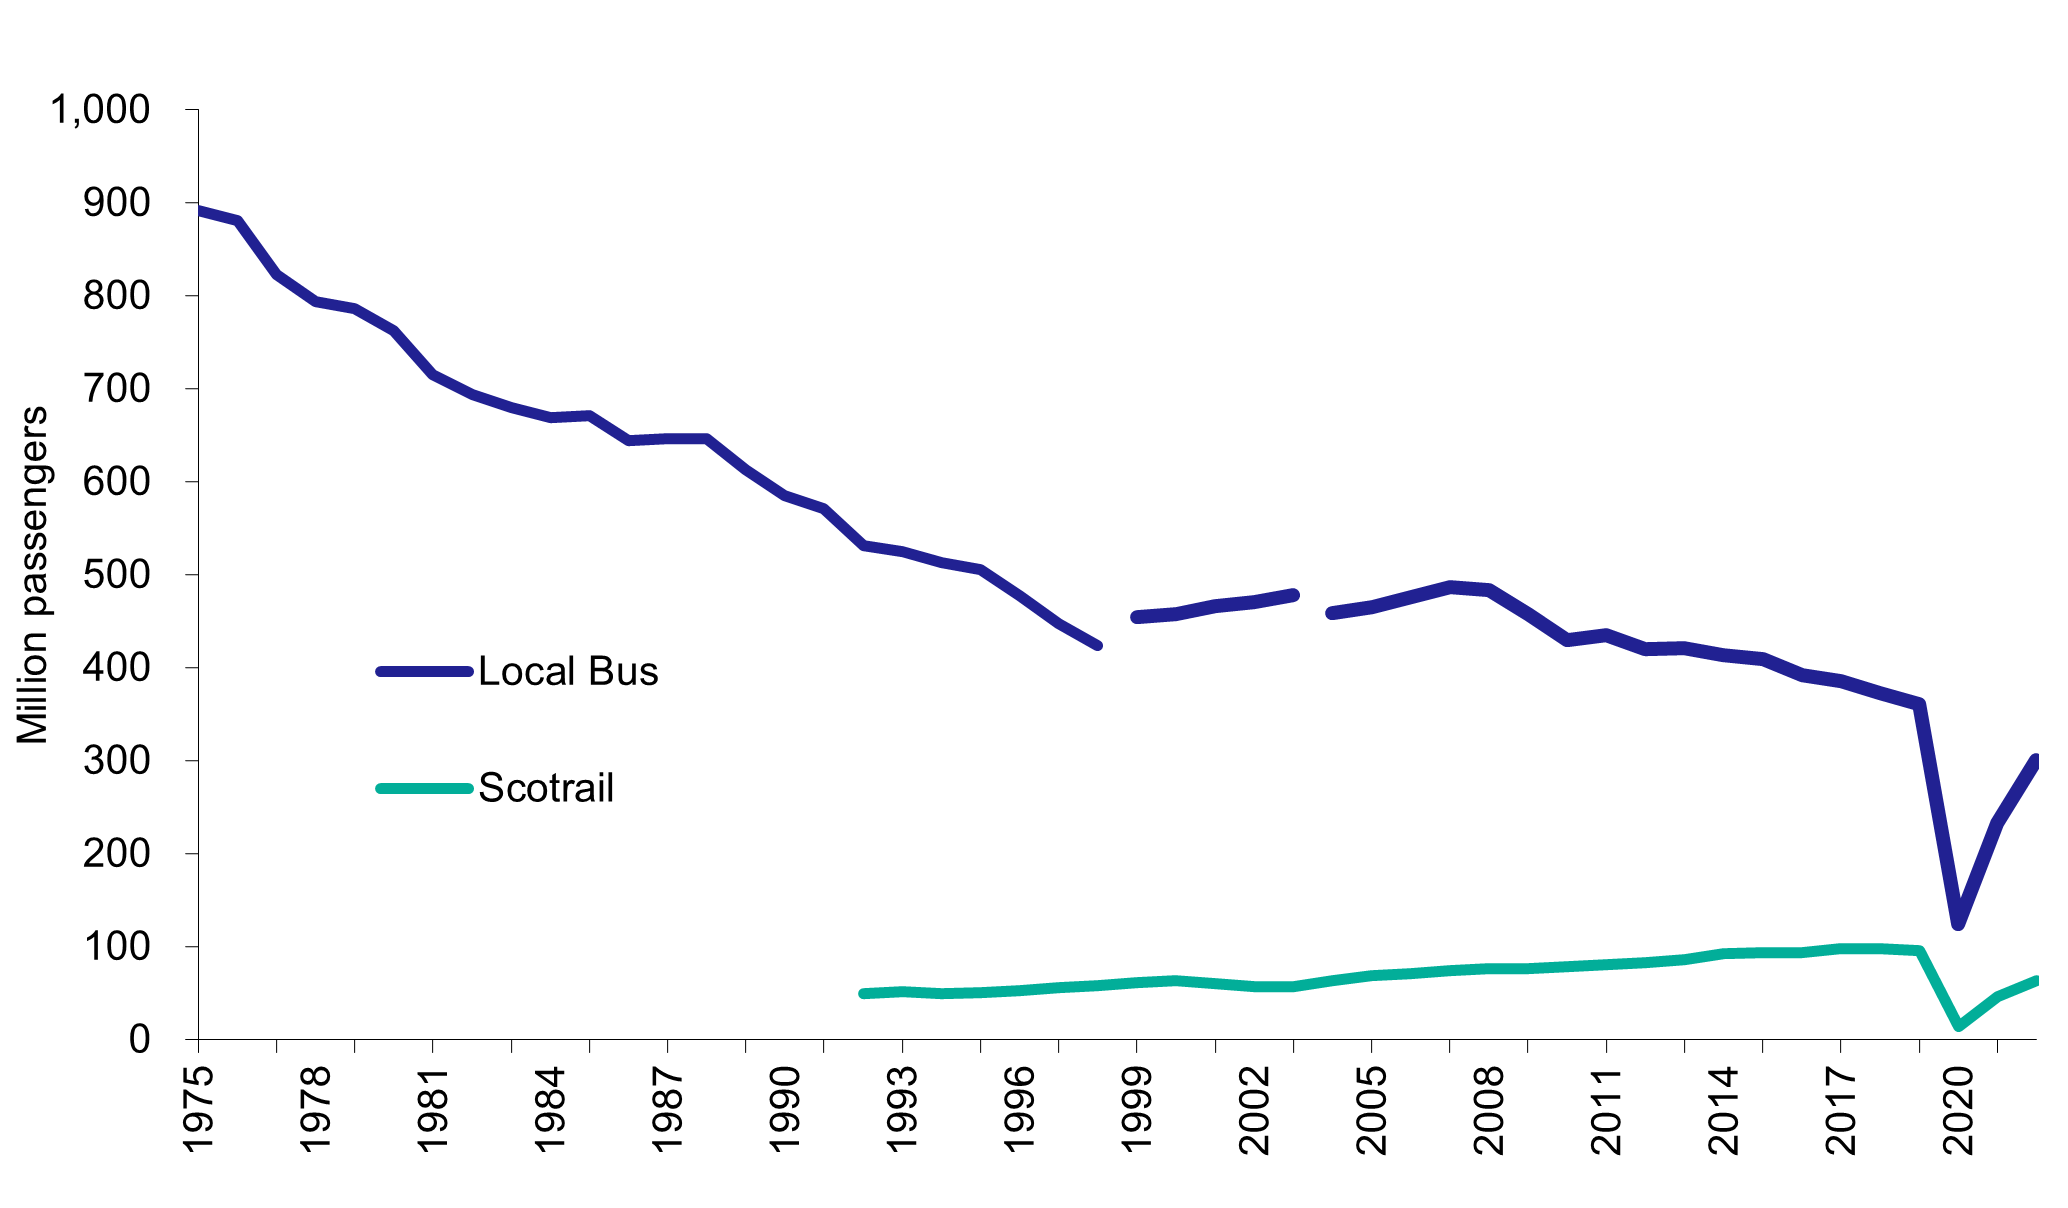 Figure 5: Bus and rail passenger numbers in Scotland, as described in text above